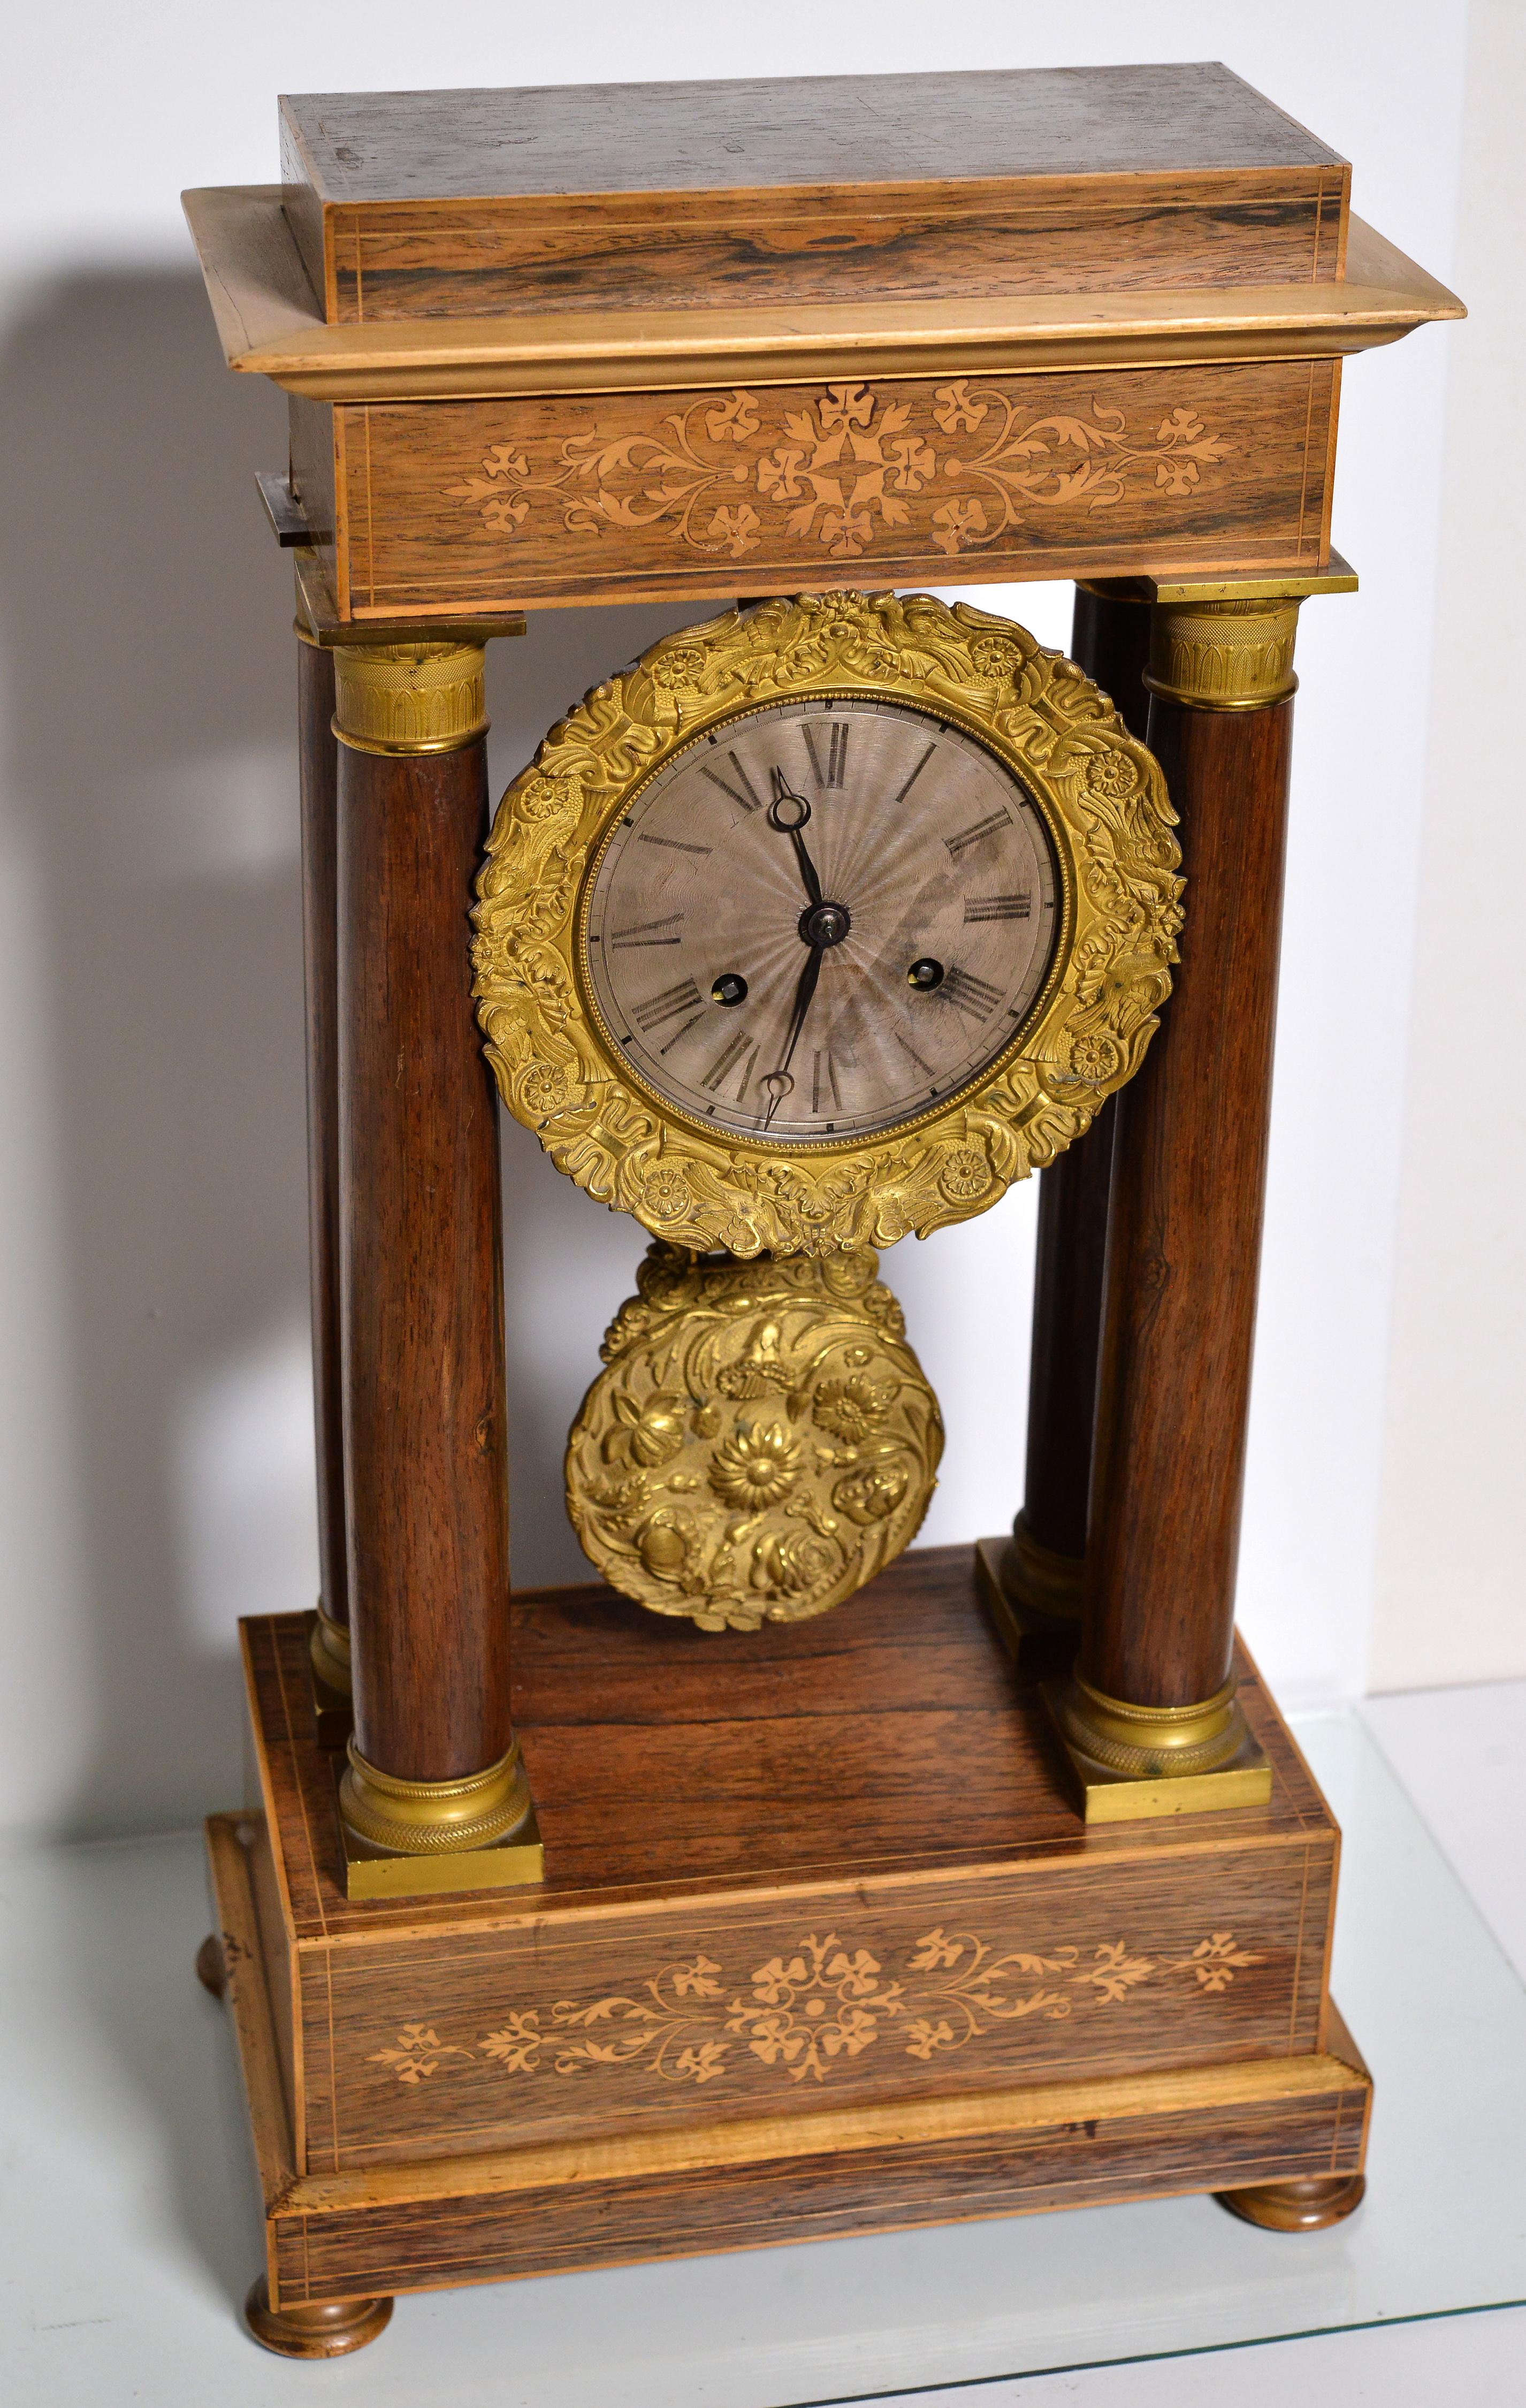 French Portico clock Rosewood n Marquetry early 19th century Gilt n Silverplated In Good Condition For Sale In Sweden, SE